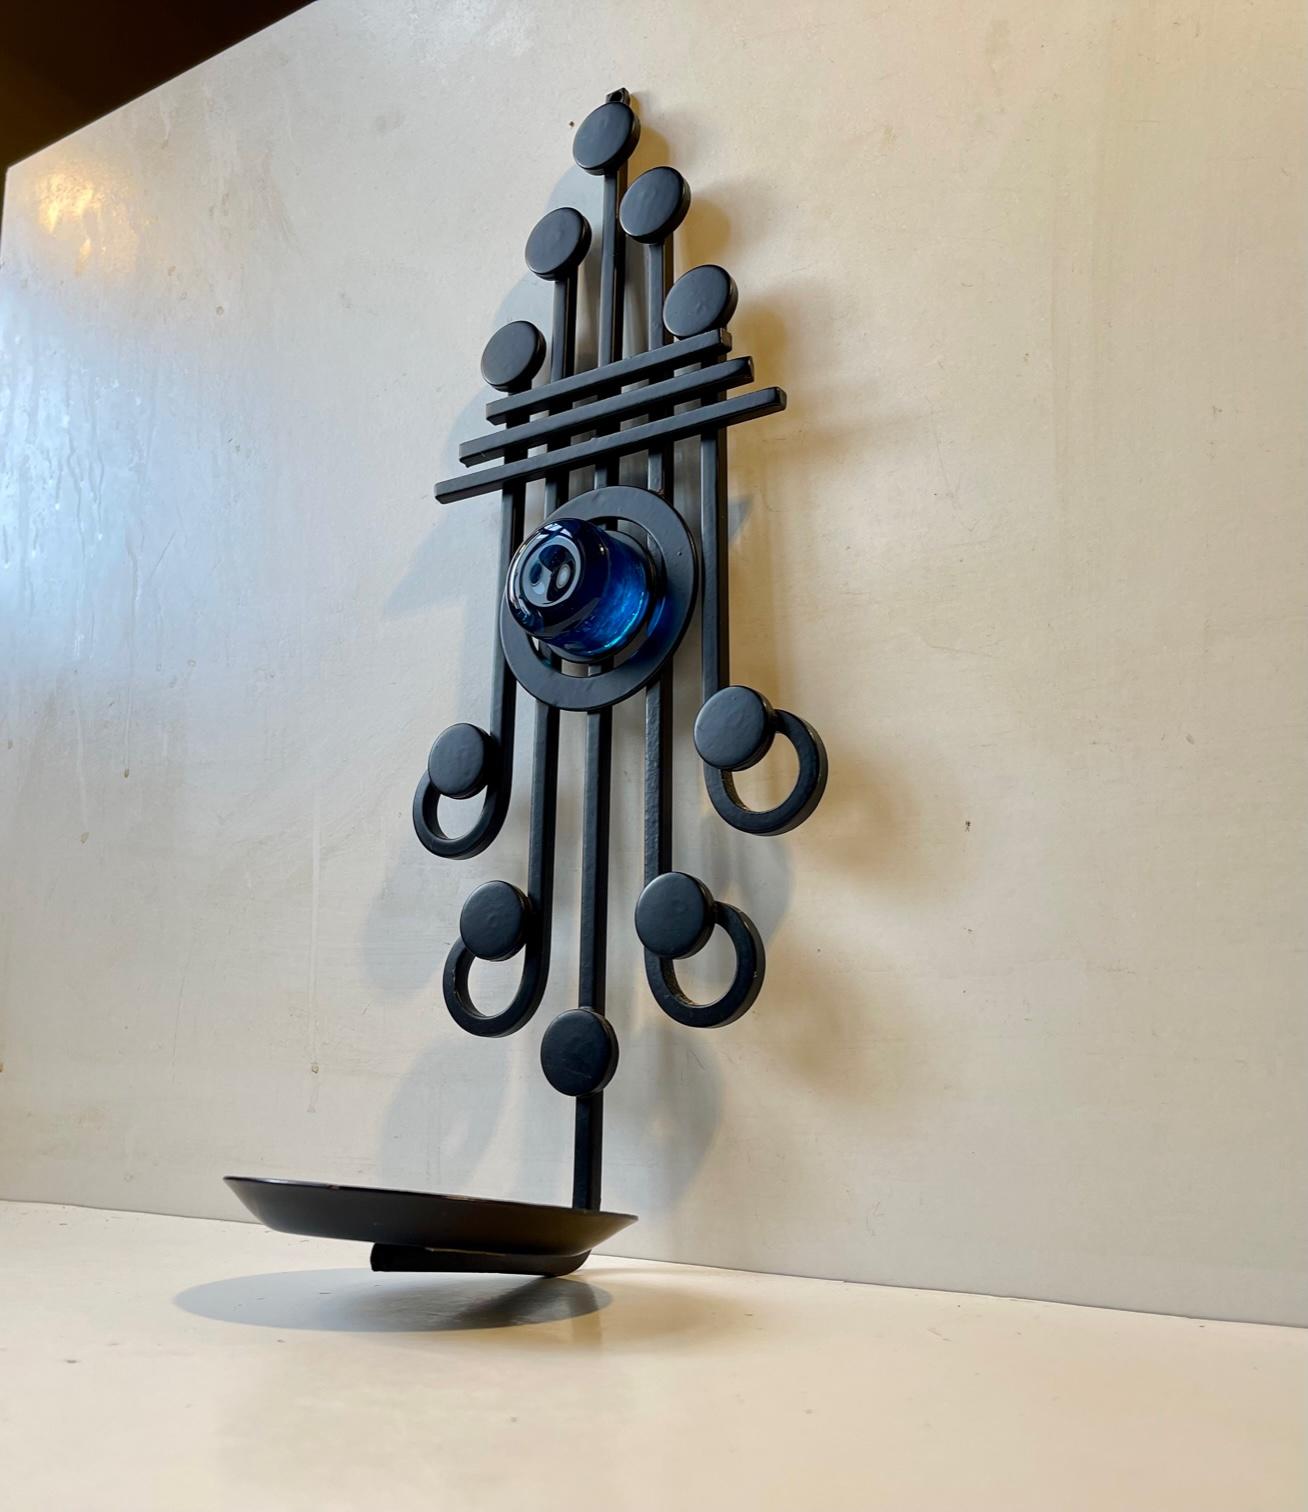 1970s Brutalist Wall sculpture made by Danish design company Dantoft kunstartikler (trans.: art objects). It is made from black lacquered and welded iron set in a graphic formation highlighted by thick blue glass mosaic. It can be installed with a